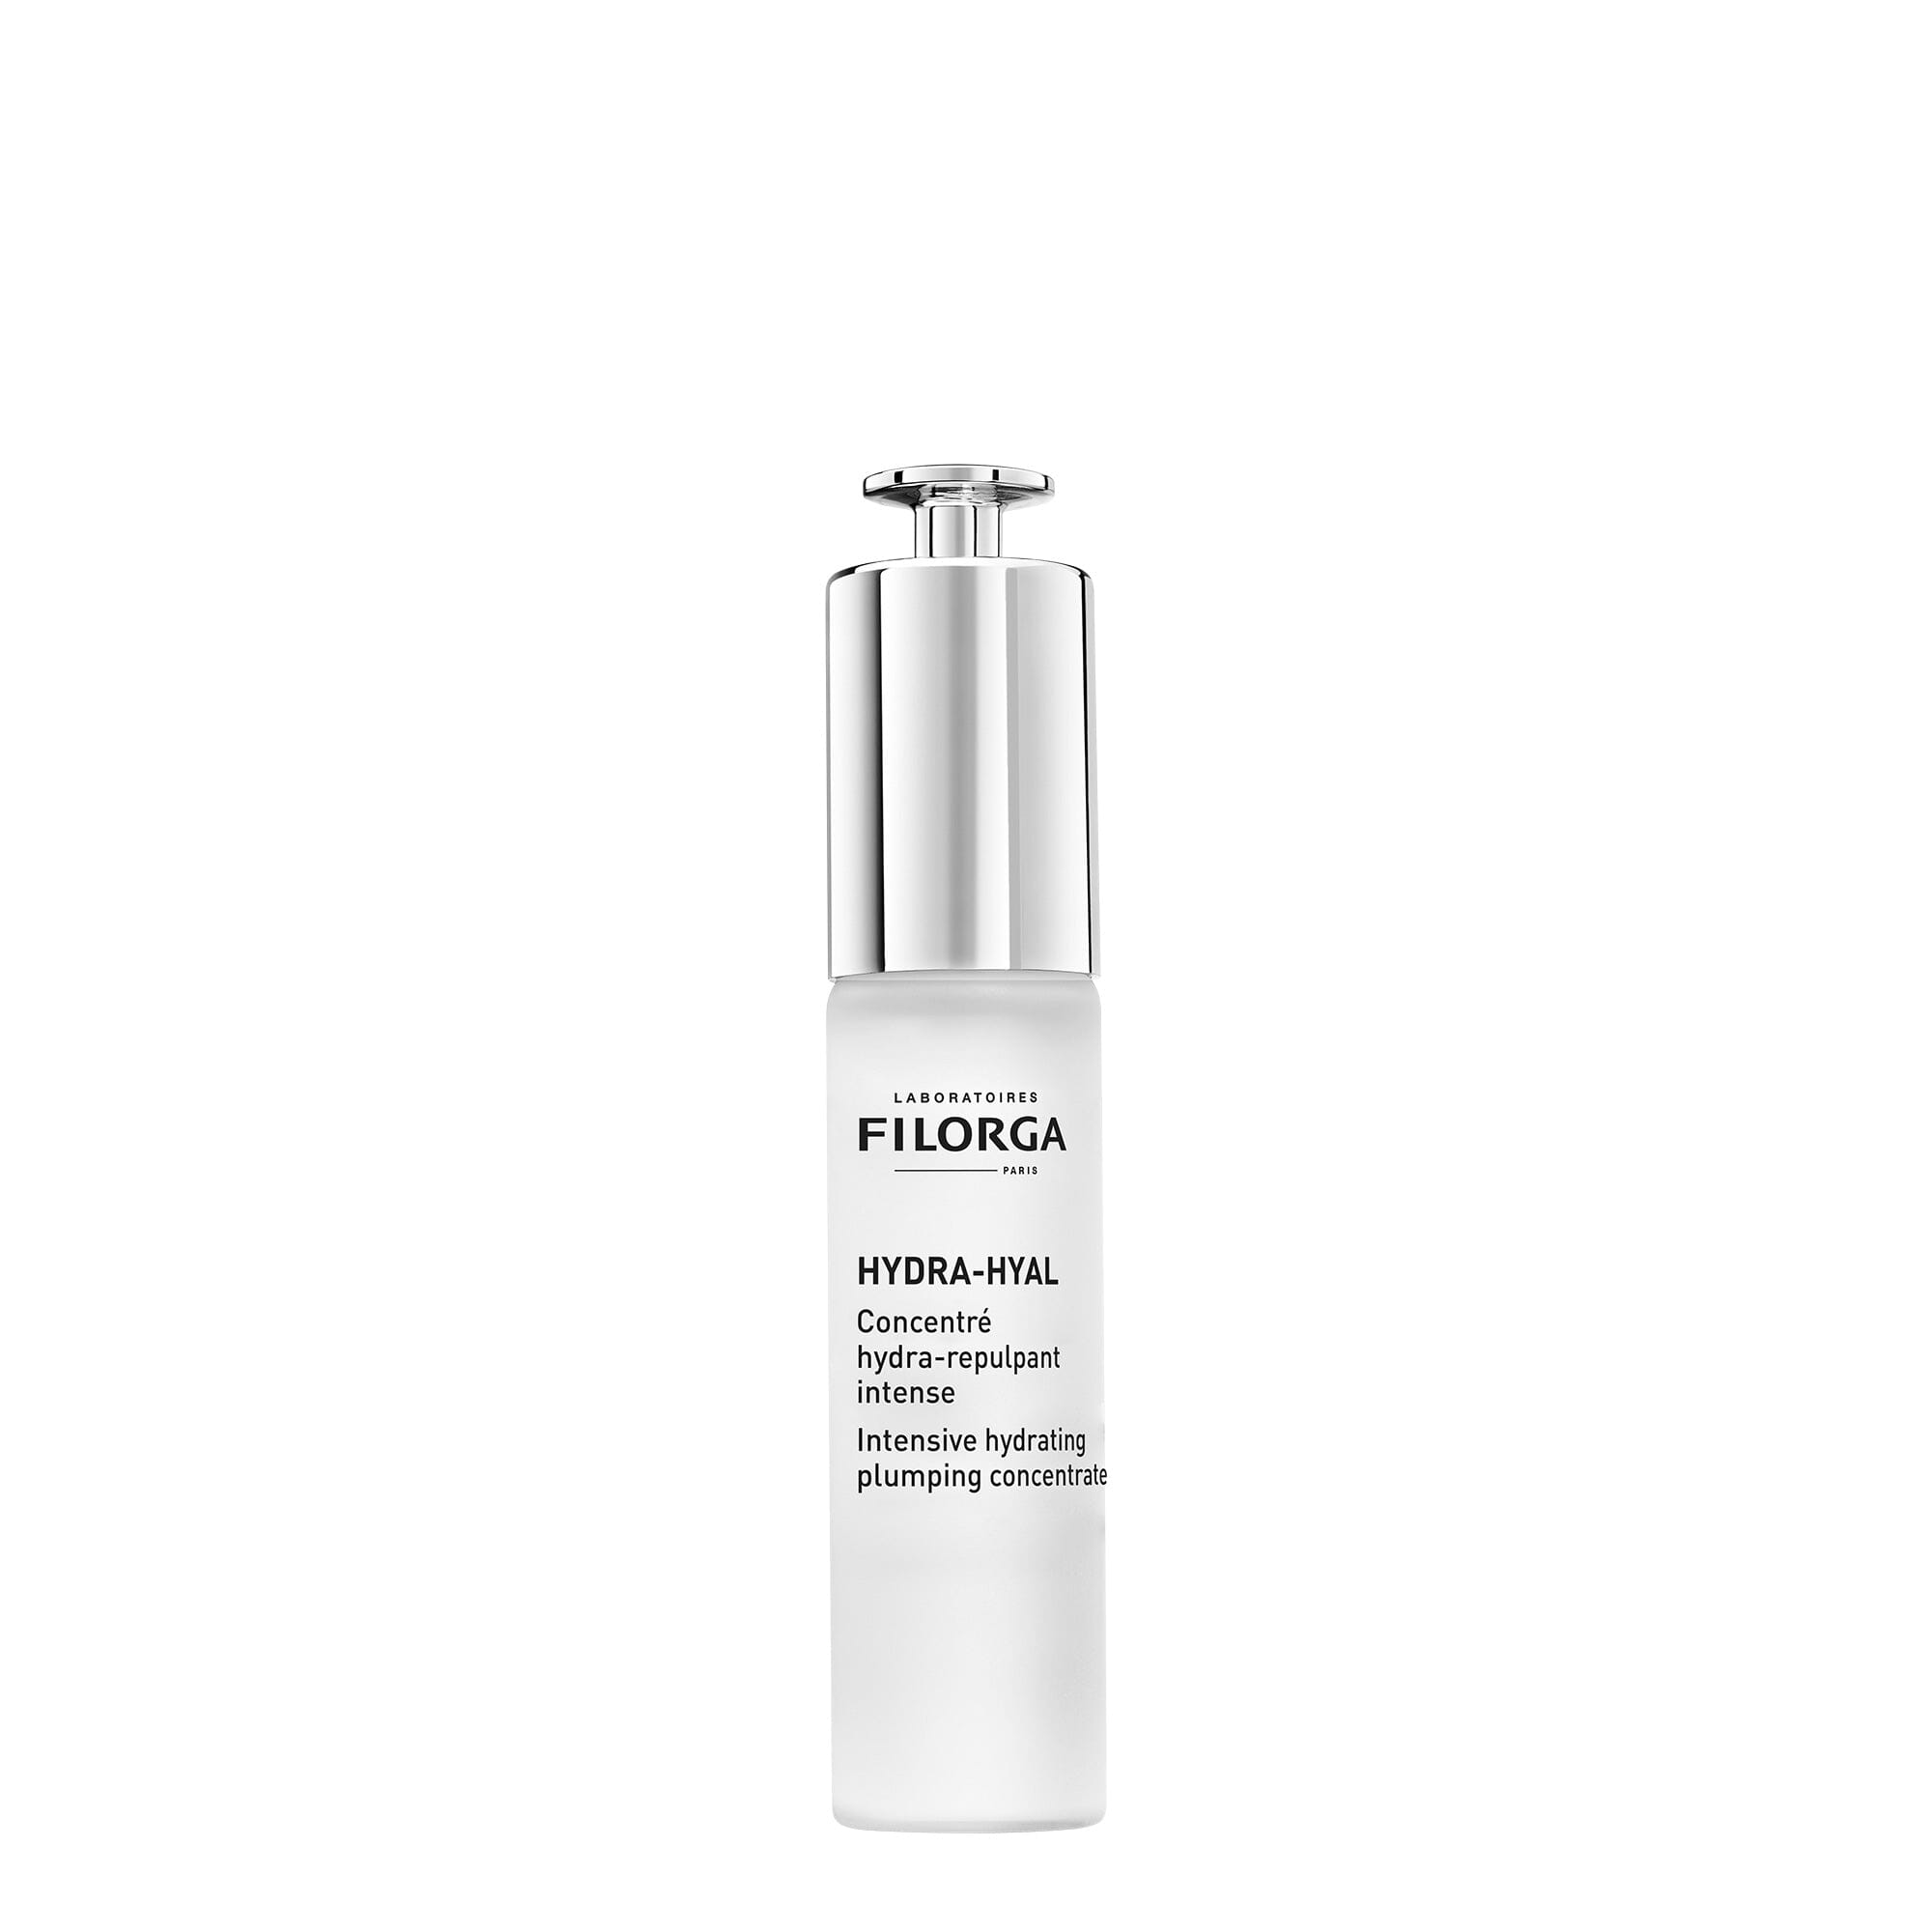 Filorga HYDRA-HYAL Intensive Hydrating Plumping Concentrate Filorga 1 fl. oz. Shop at Exclusive Beauty Club